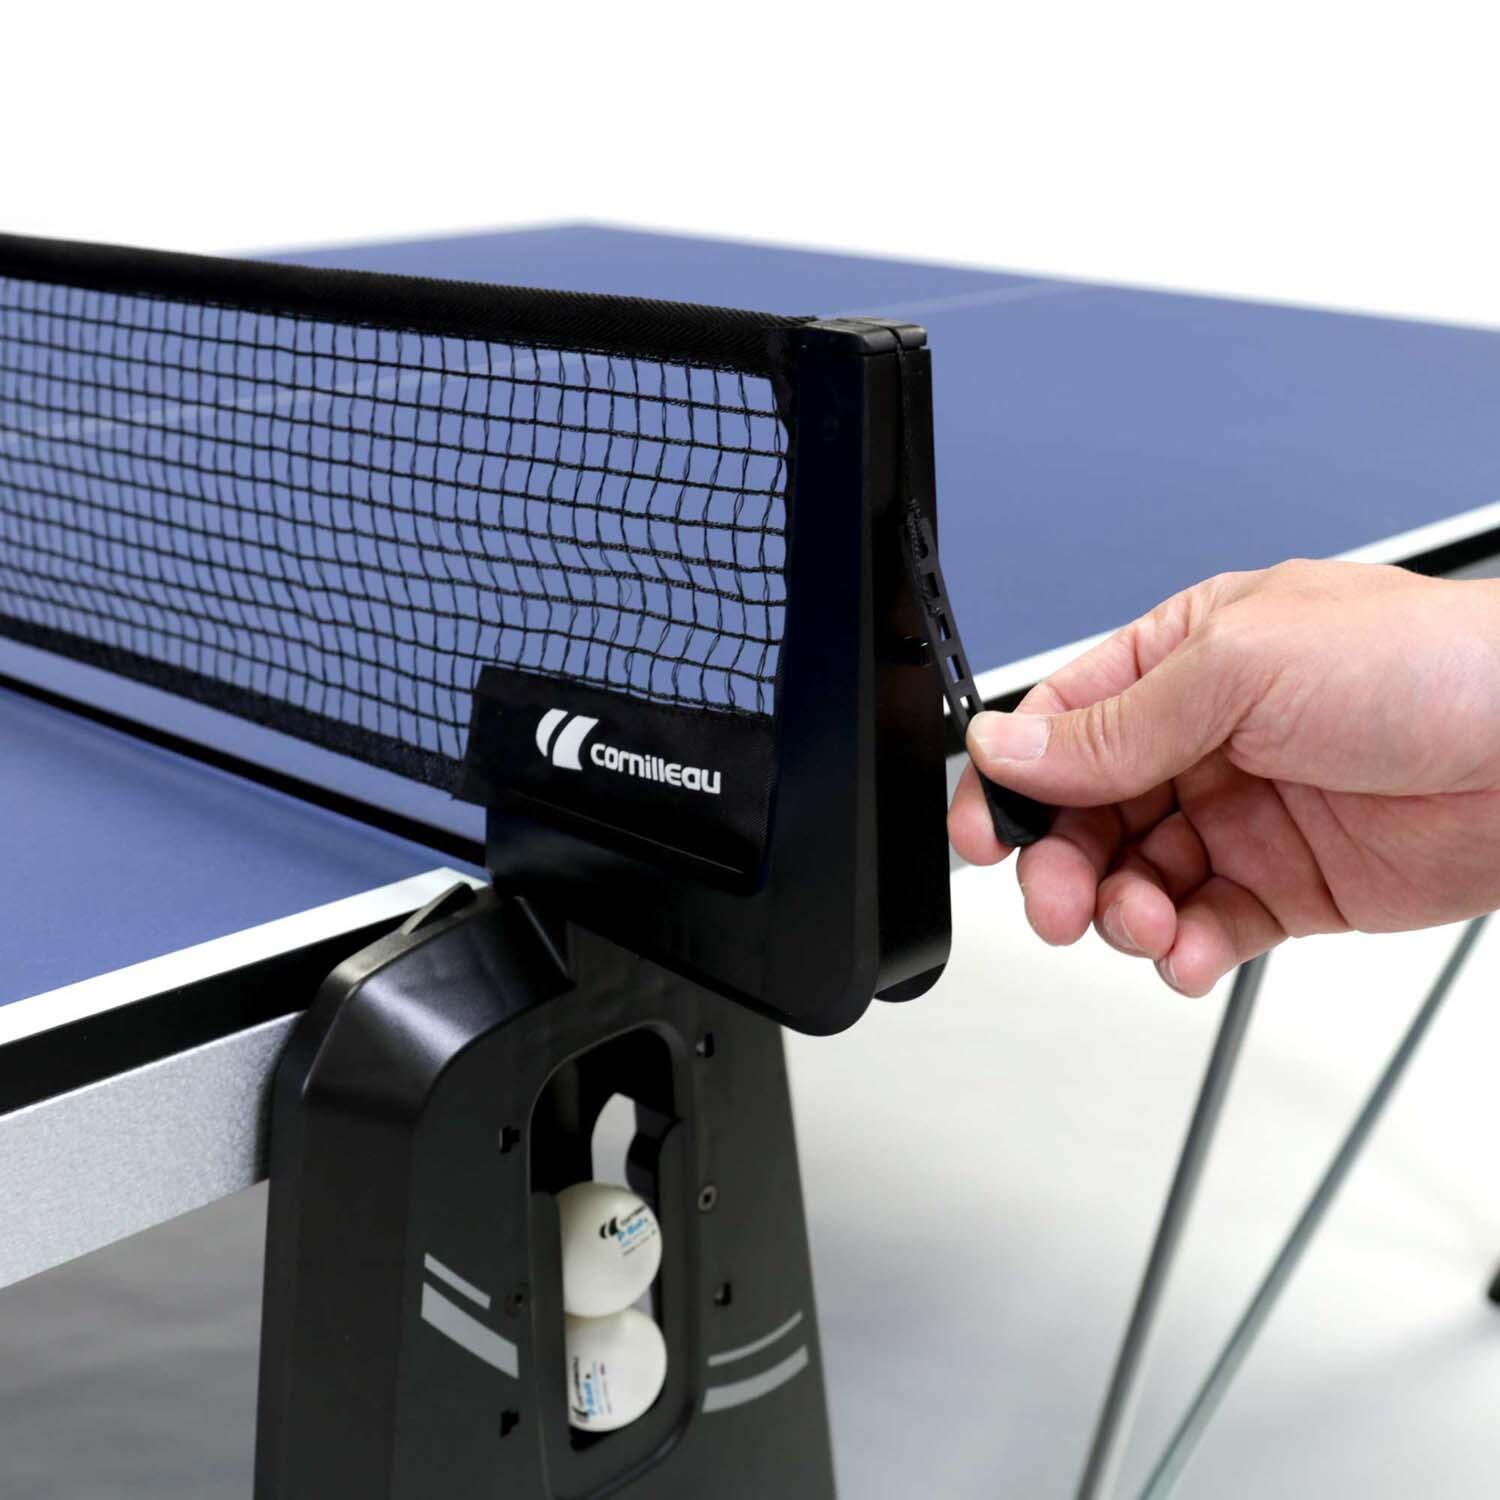 NEW 300 Indoor Table Tennis Table - Blue 6/8